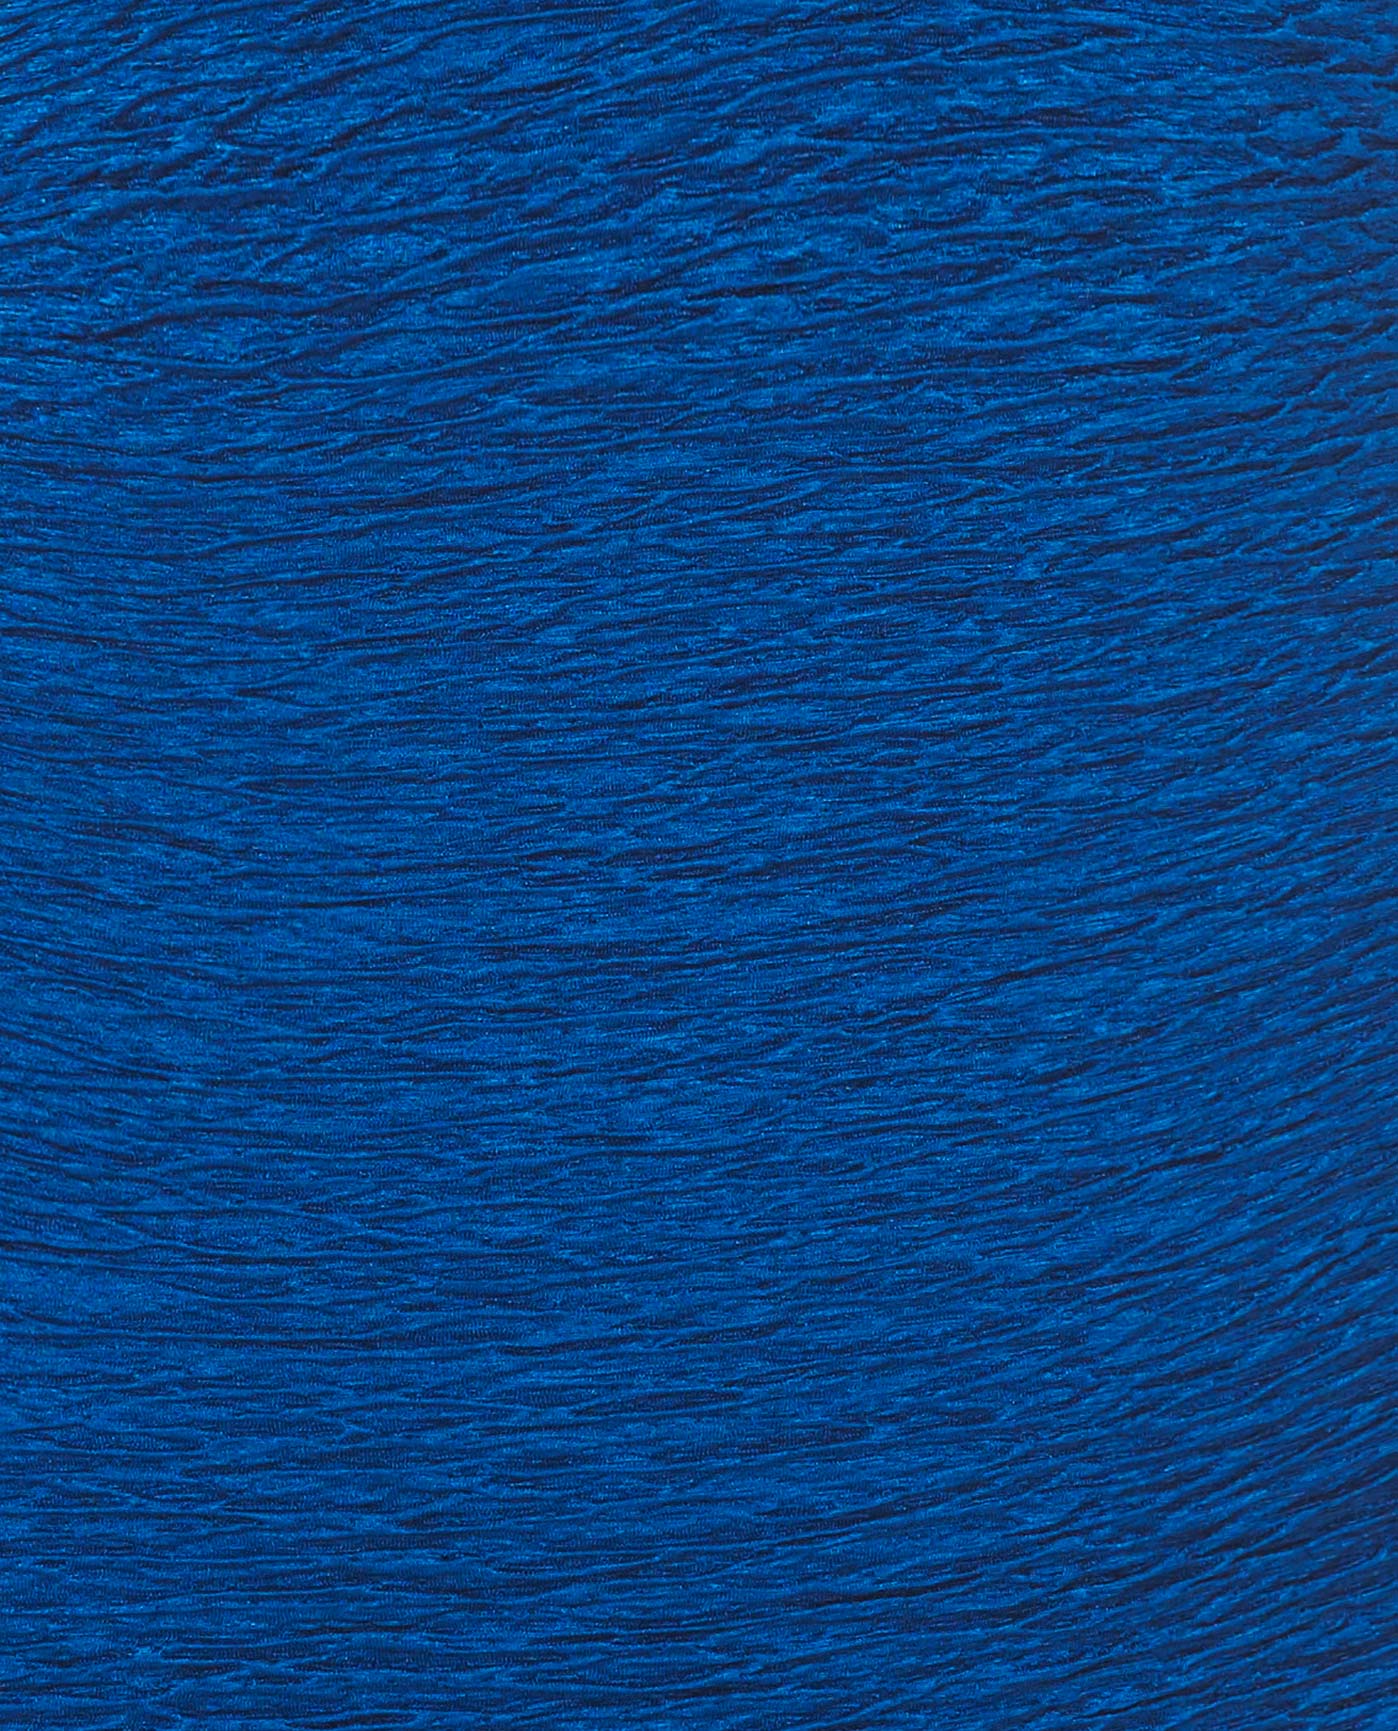 FABRIC SWATCH VIEW OF CHLORINE RESISTANT KRINKLE TEXTURED SOLID TWIST FRONT LONG TORSO ONE PIECE | KRINKLE MARINE BLUE